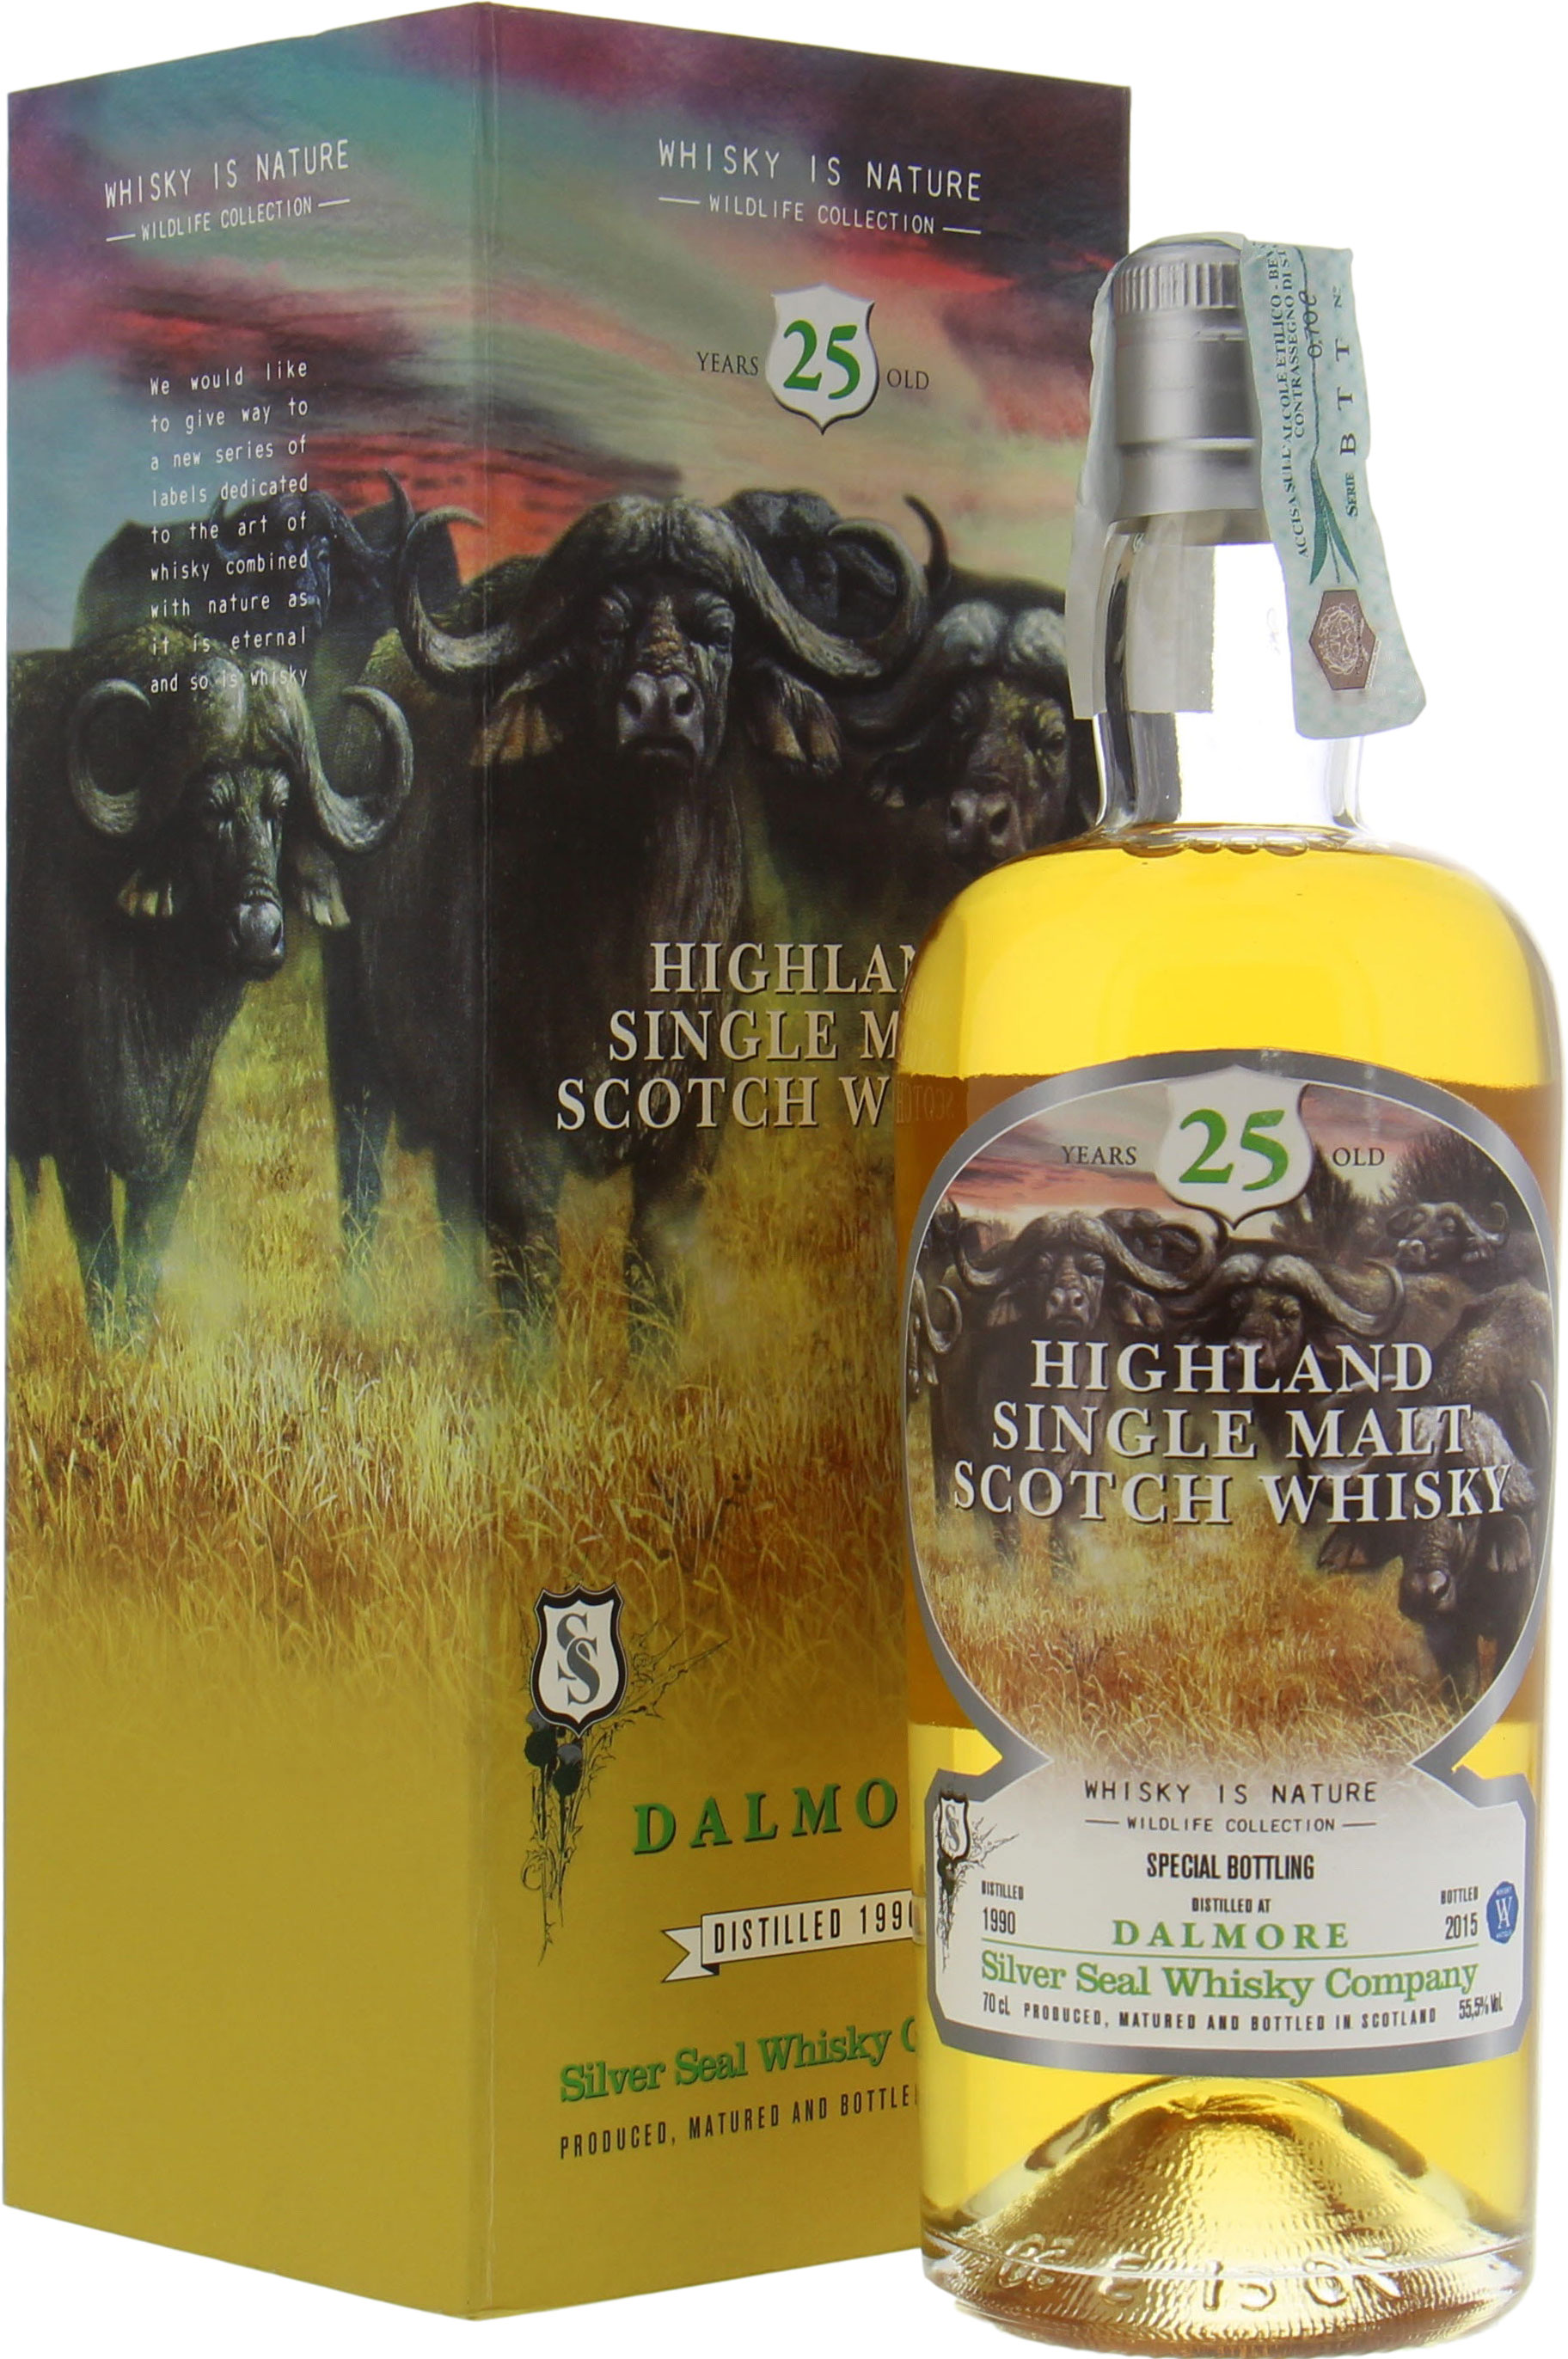 Dalmore - 25 Years Old Silver Seal Whisky Is Nature Cask 66 55.5% 1990 In Original Container